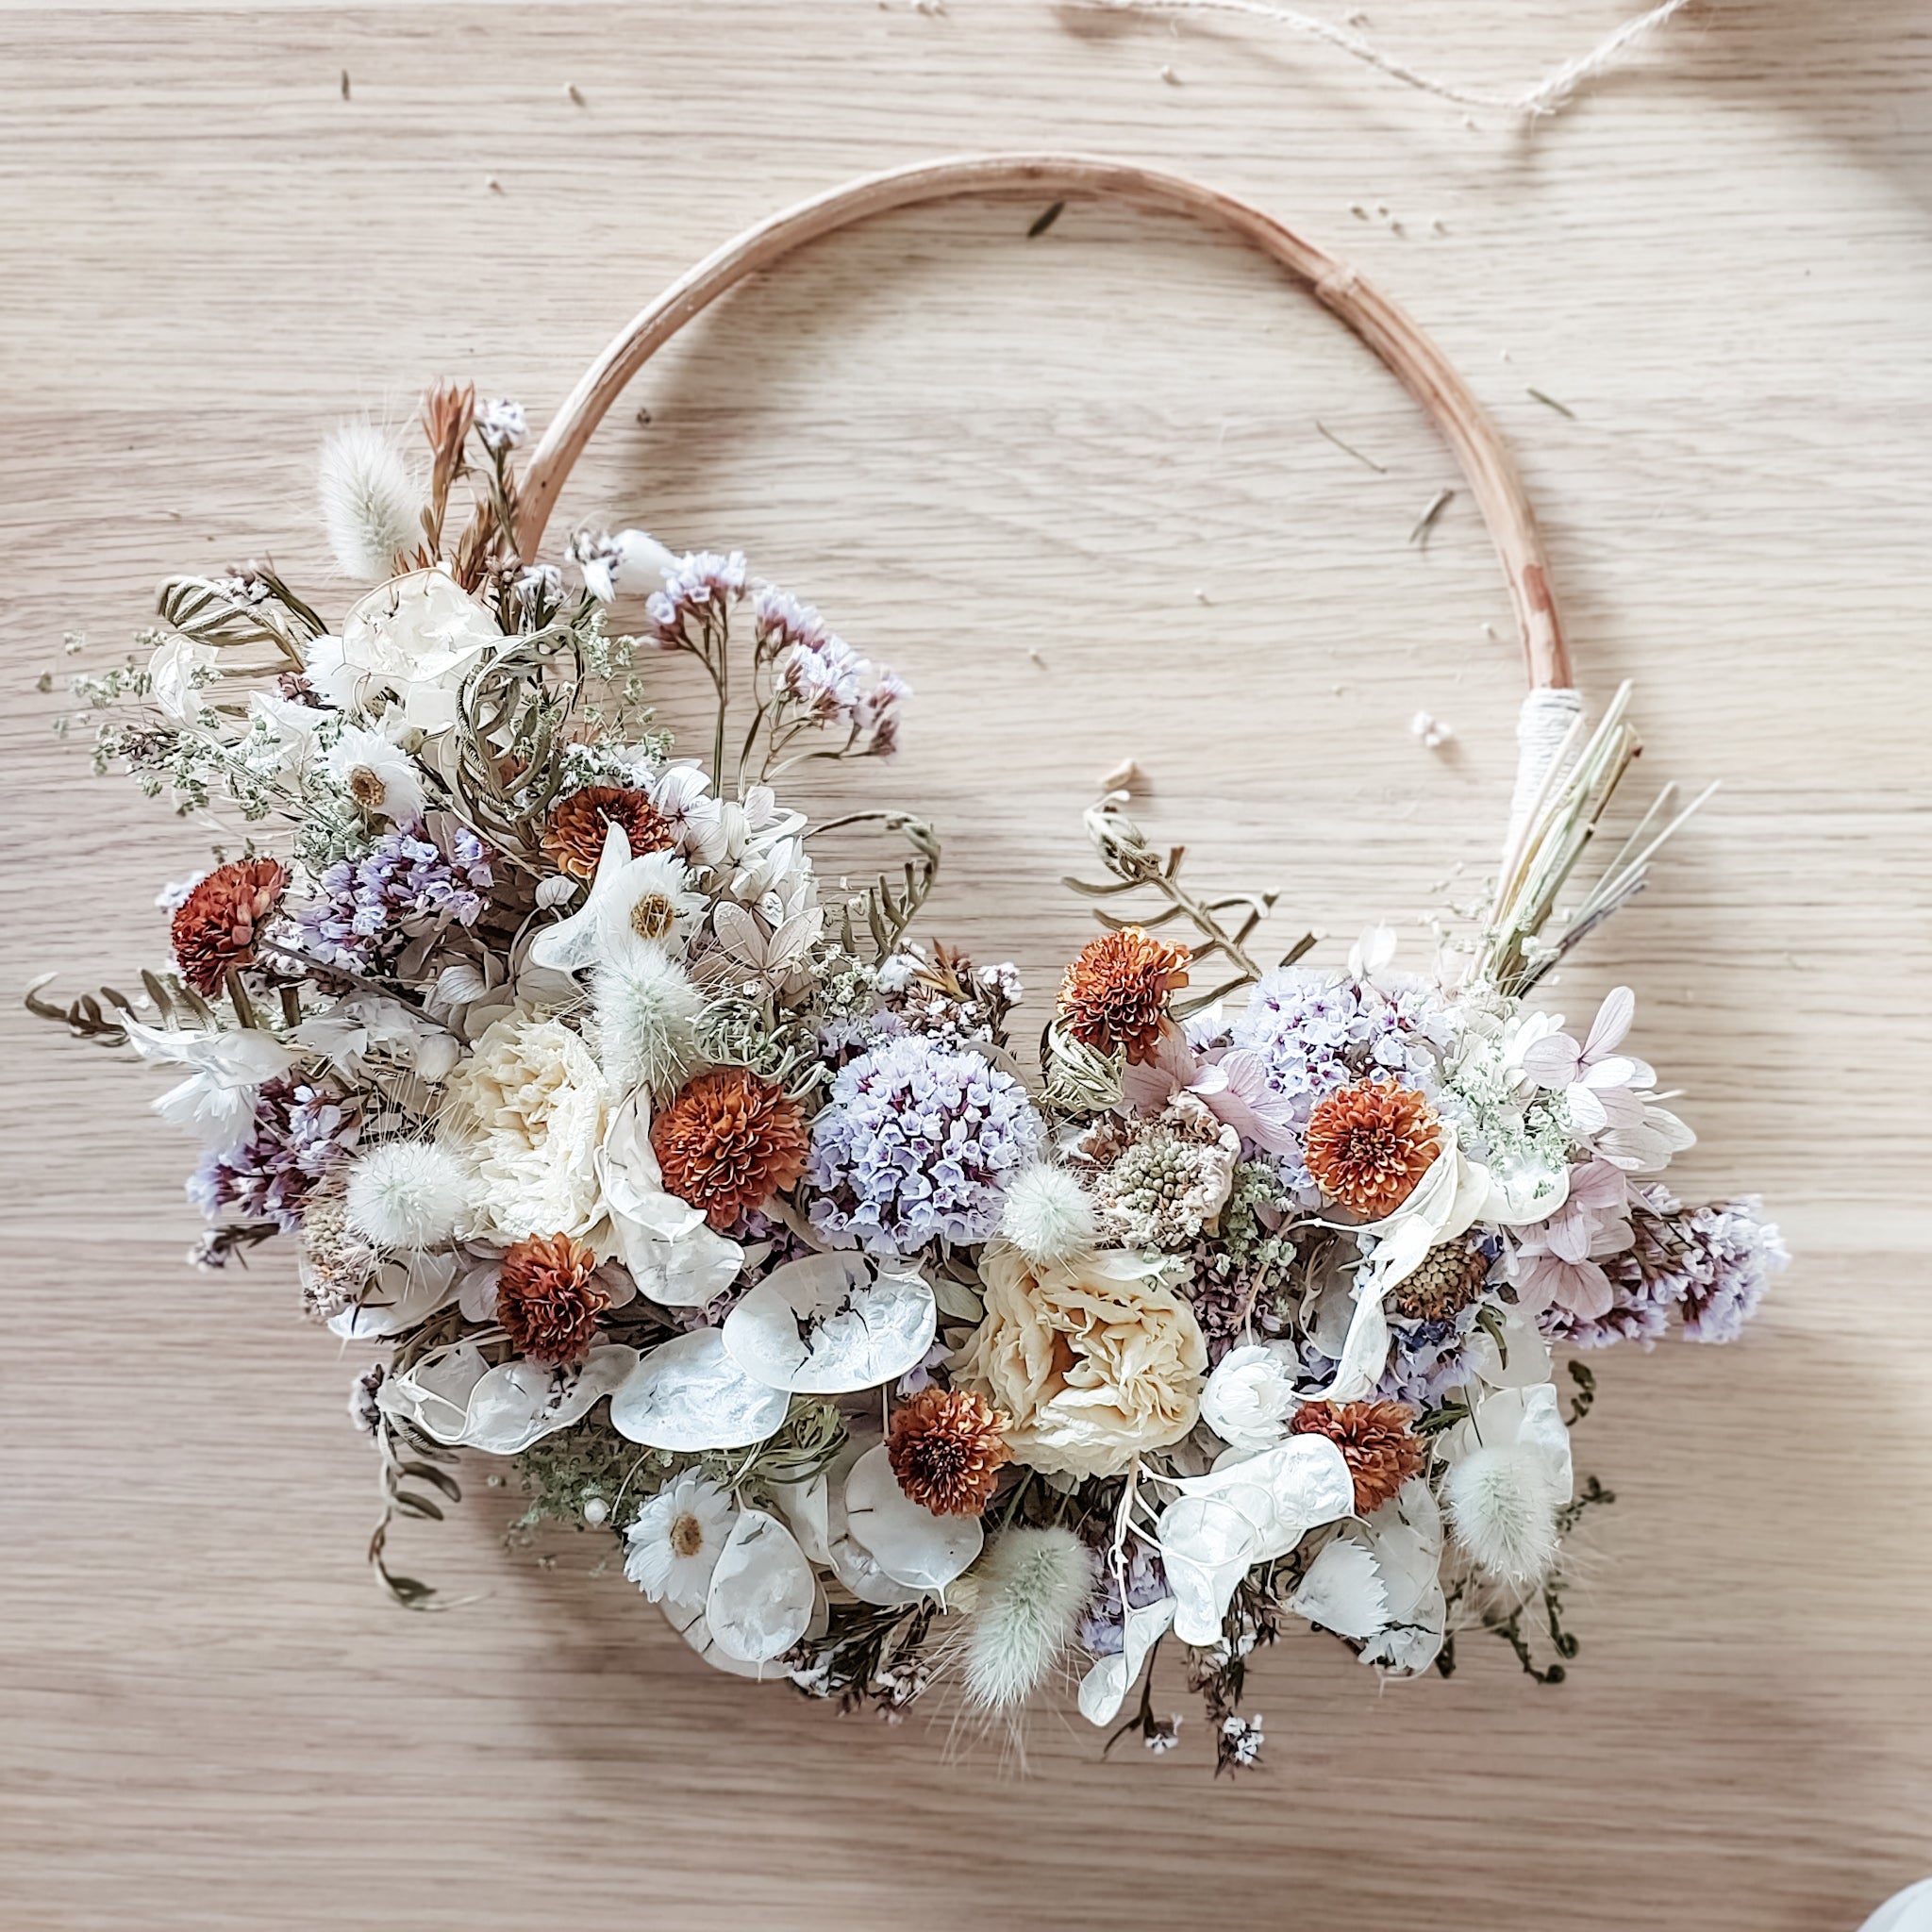 Dried flower wreath in lilac tones on a rattan hoop base